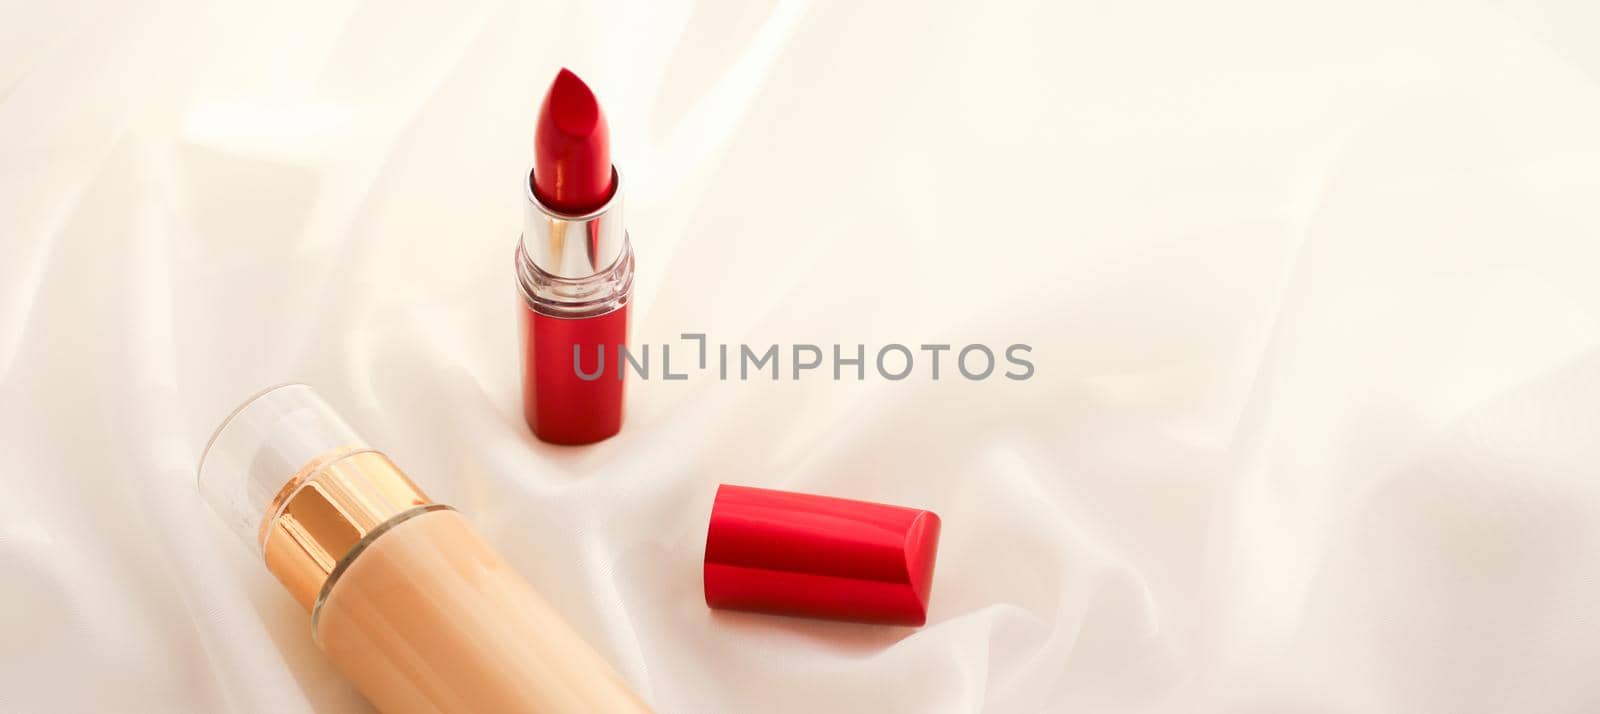 Beige tonal cream bottle make-up fluid foundation base and red lipstick on silk background, cosmetics products as luxury beauty brand holiday design by Anneleven